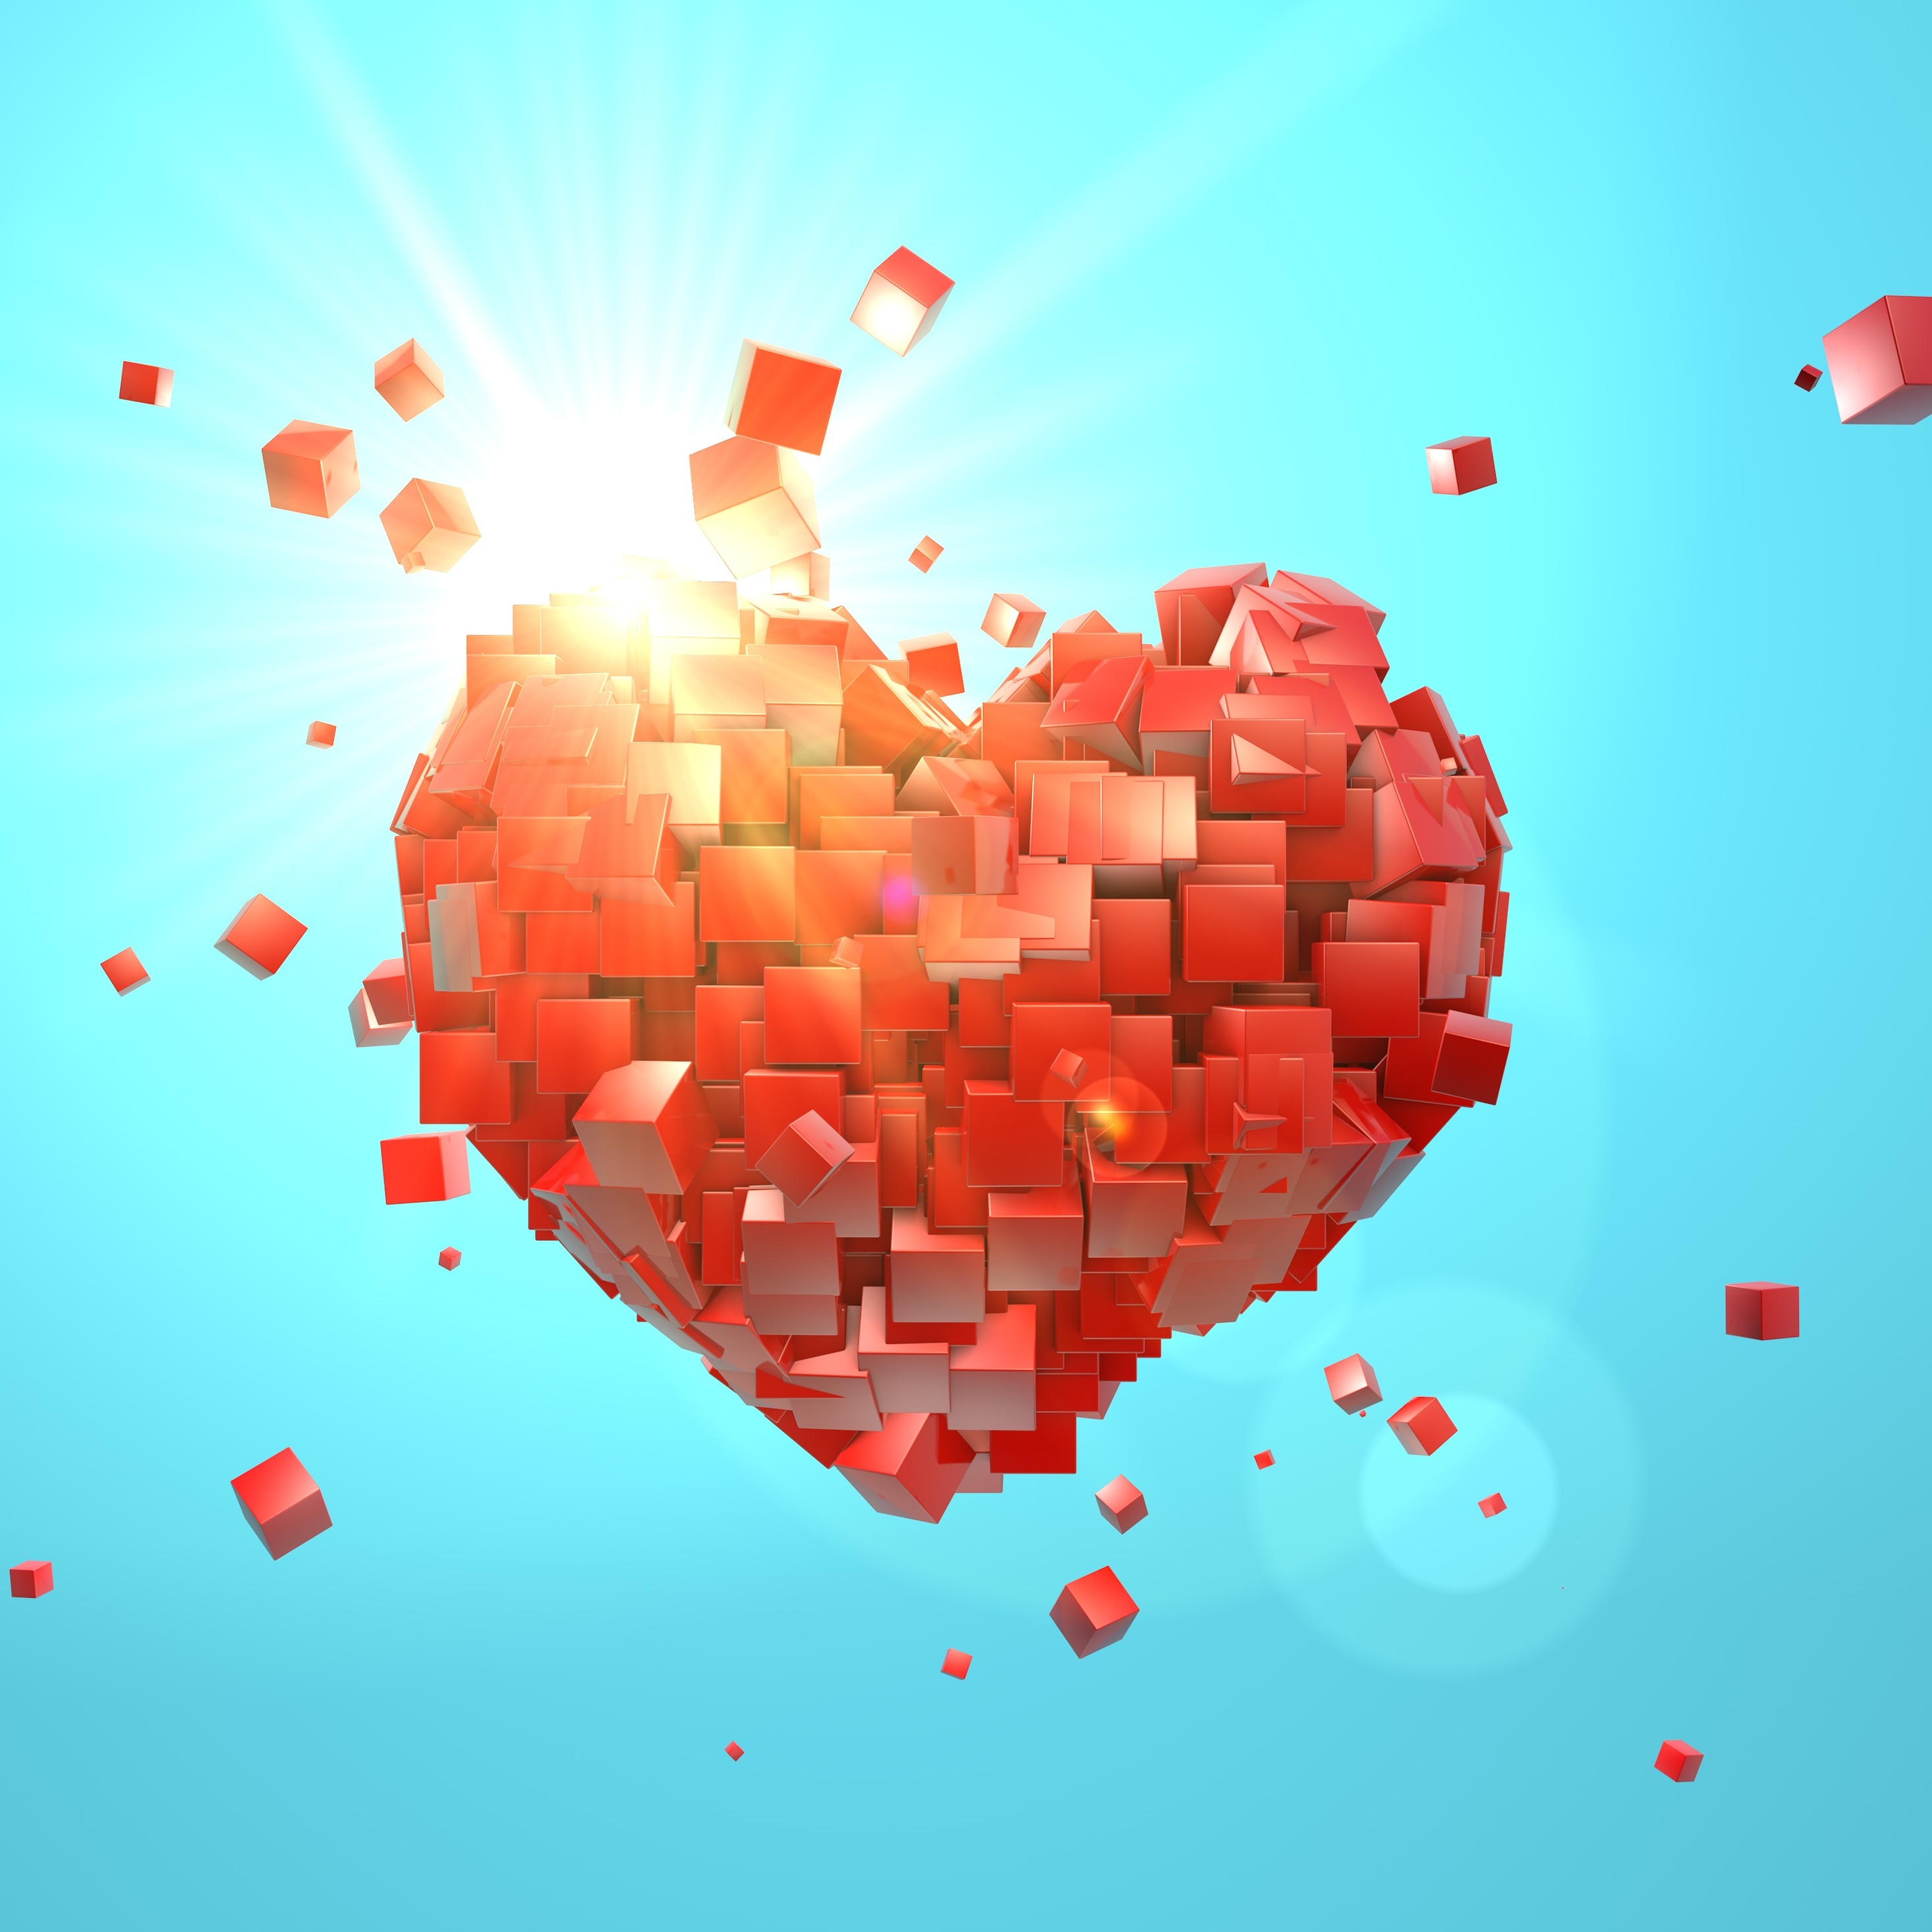 Heart Explosion Love Red Abstract Valentine Day iPad Pro Retina Display HD 4k Wallpaper, Image, Background, Photo and Picture